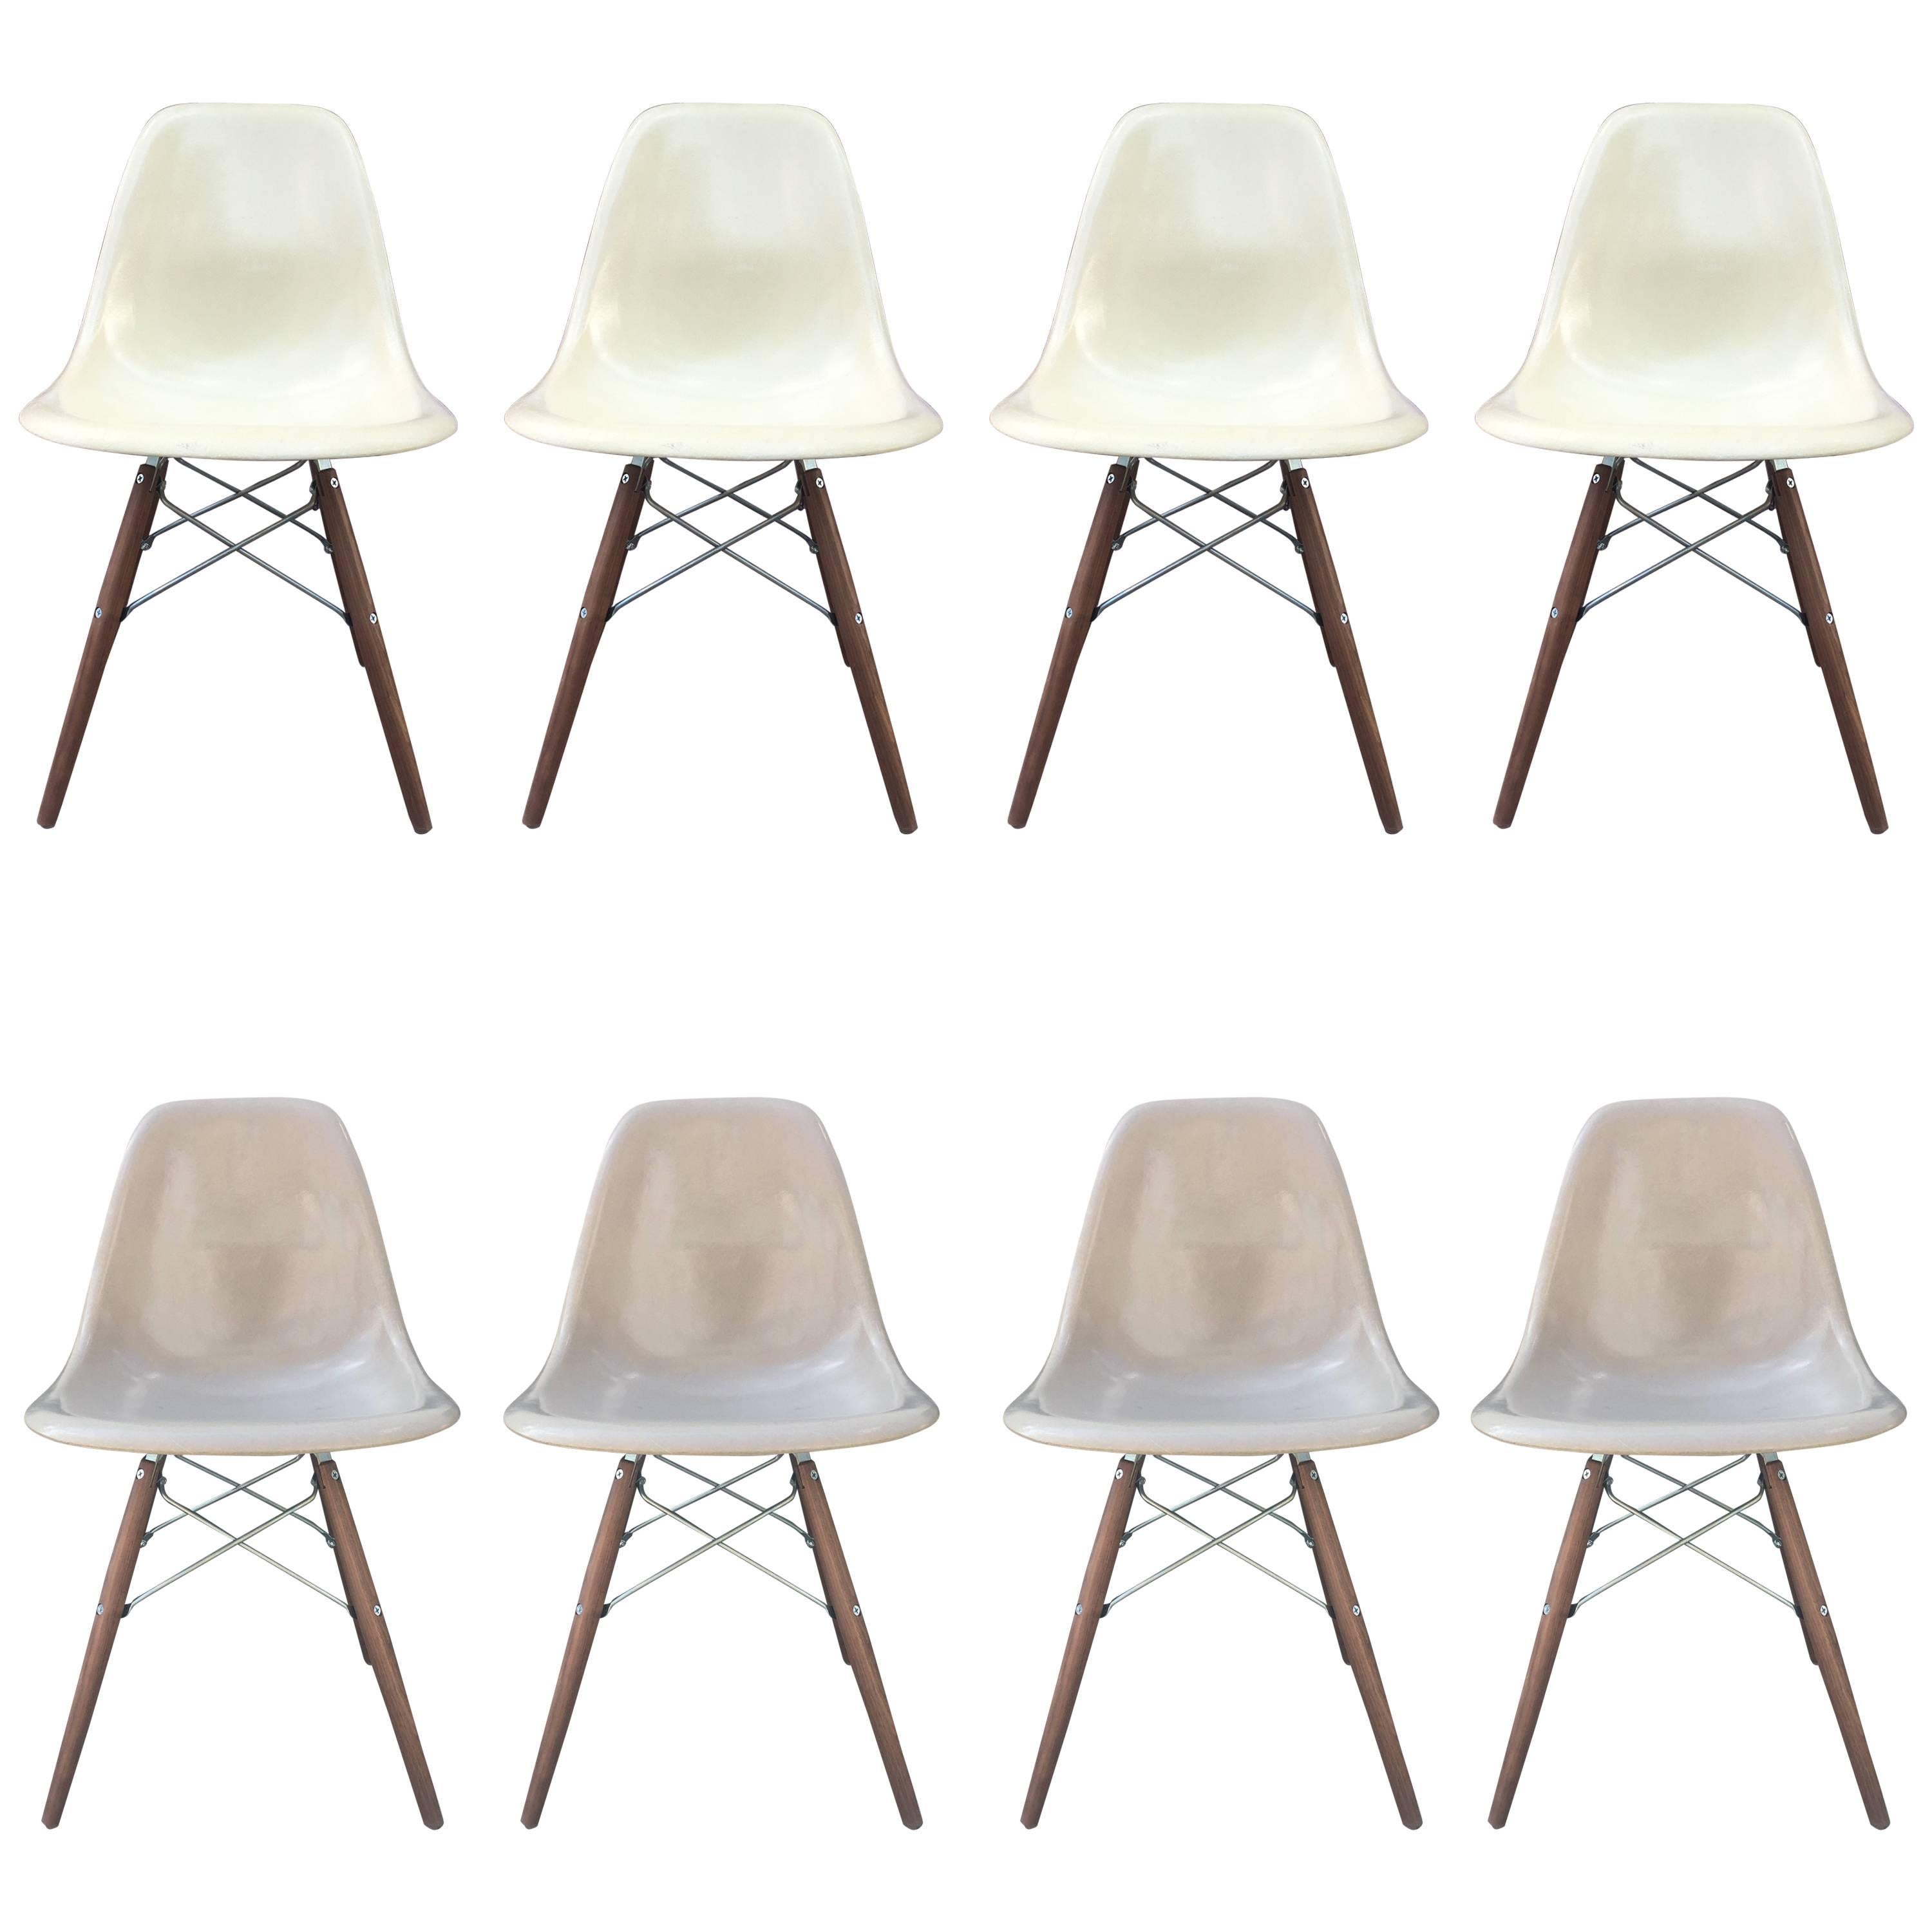 Eight Herman Miller Eames Dining Chairs in Parchment and Tan